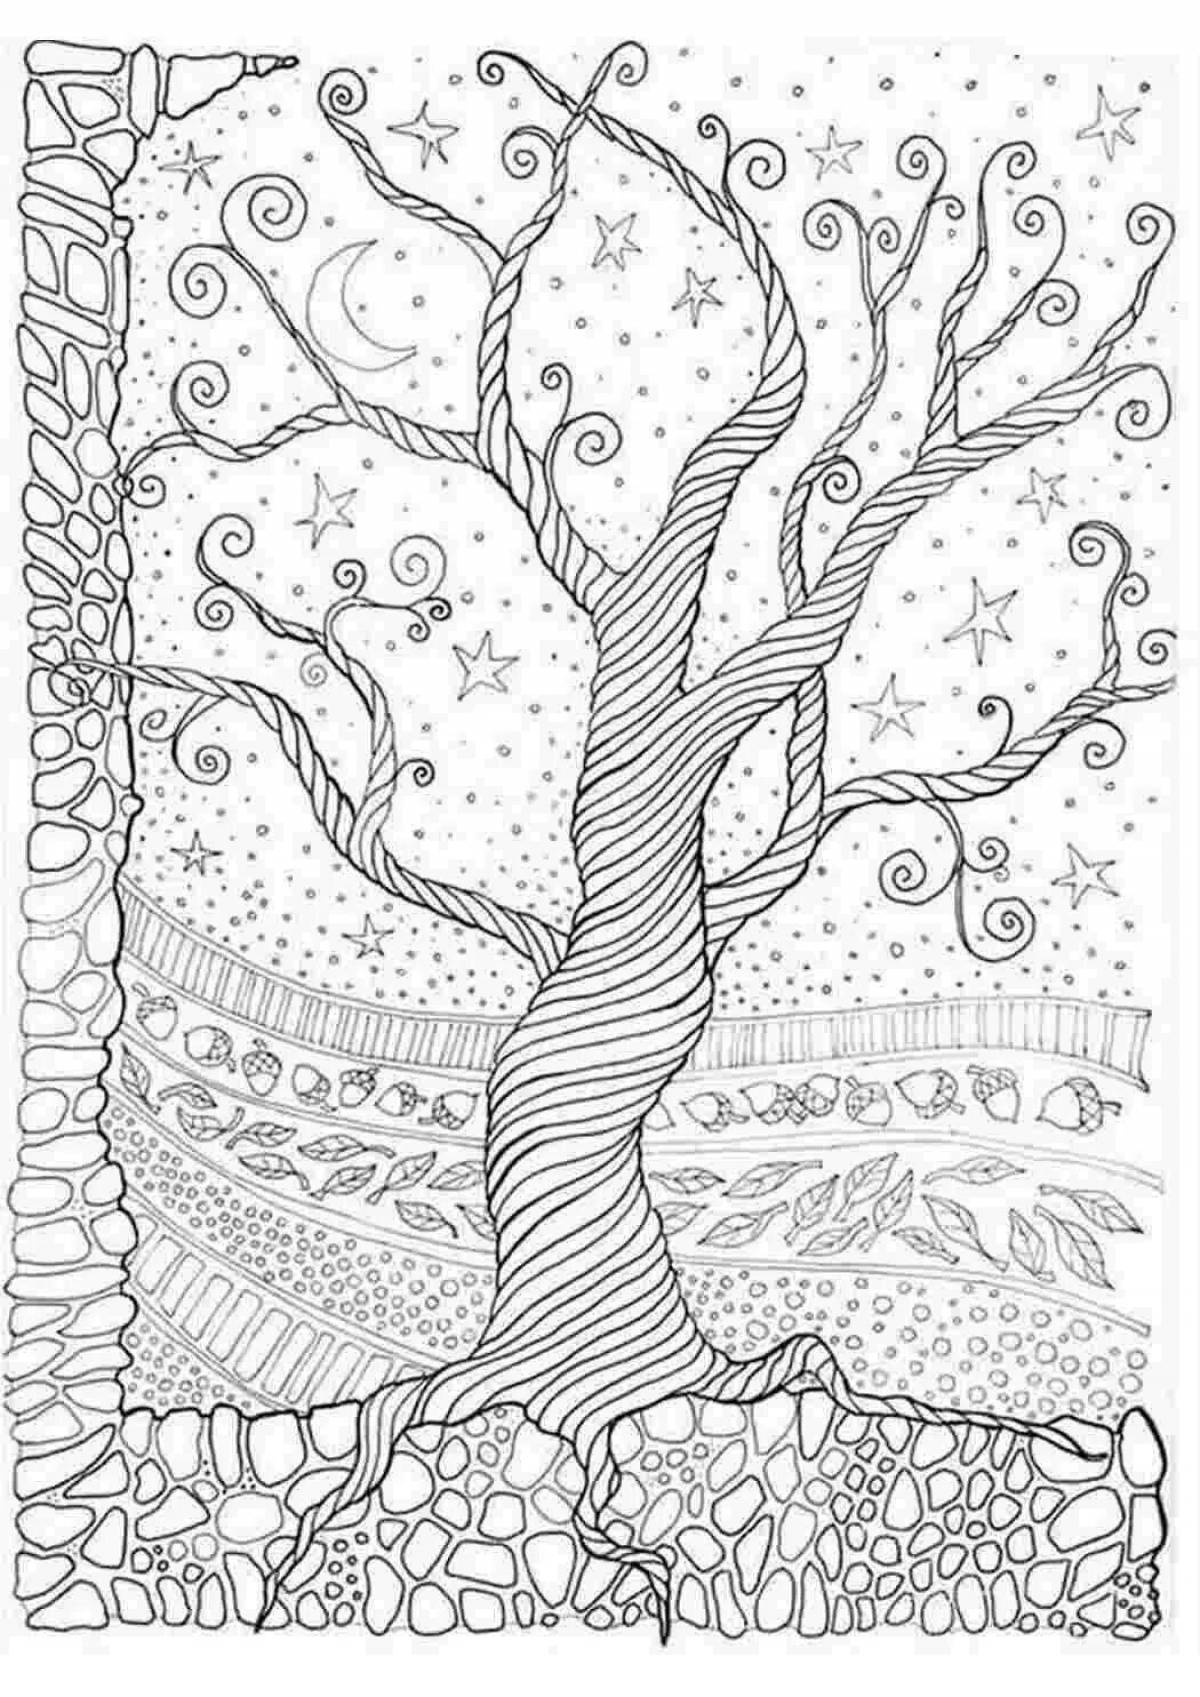 Coloring peaceful tree antistress